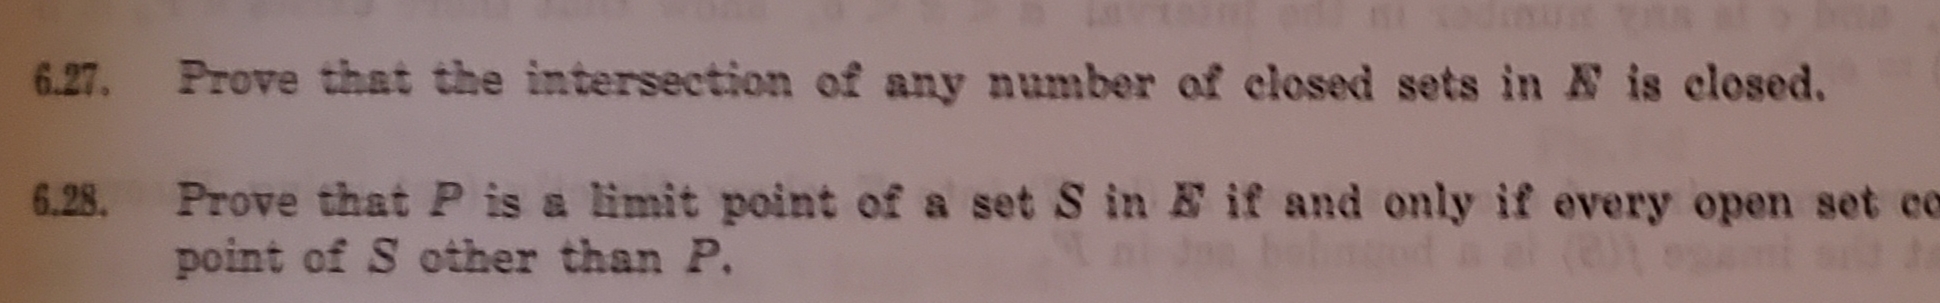 Prove that the intersection of any number of closed sets in A is closed.
6.27
Prove that P is a limit point of a set S in E if and only if every open set co
point of S other than P.
6.28
